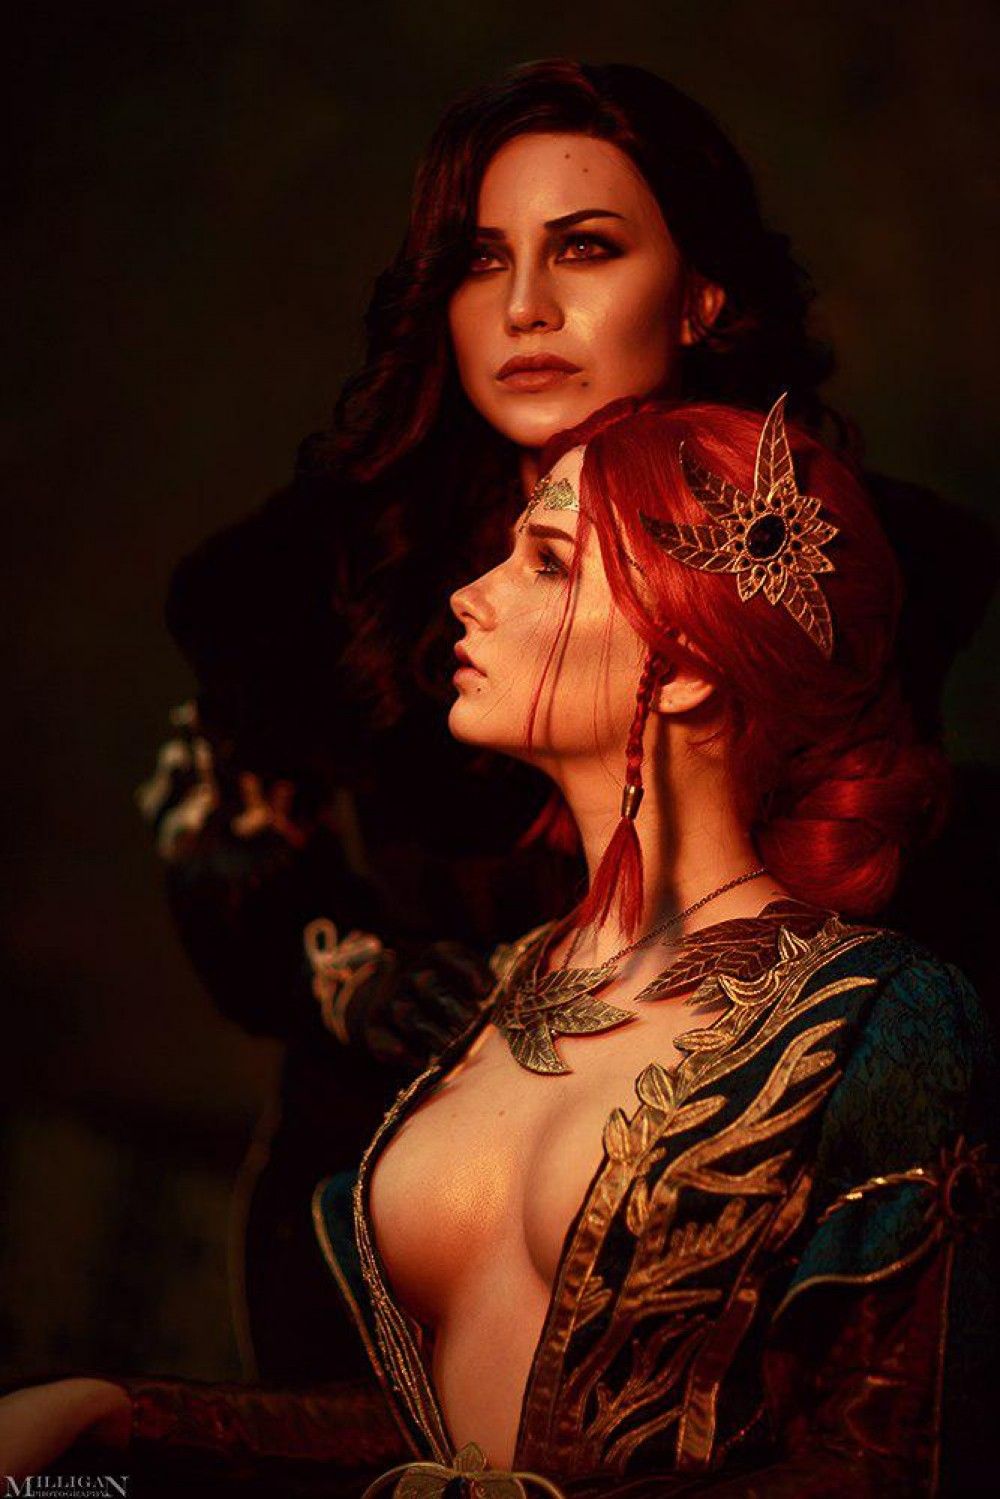 19. The Witcher By Milliganvick2